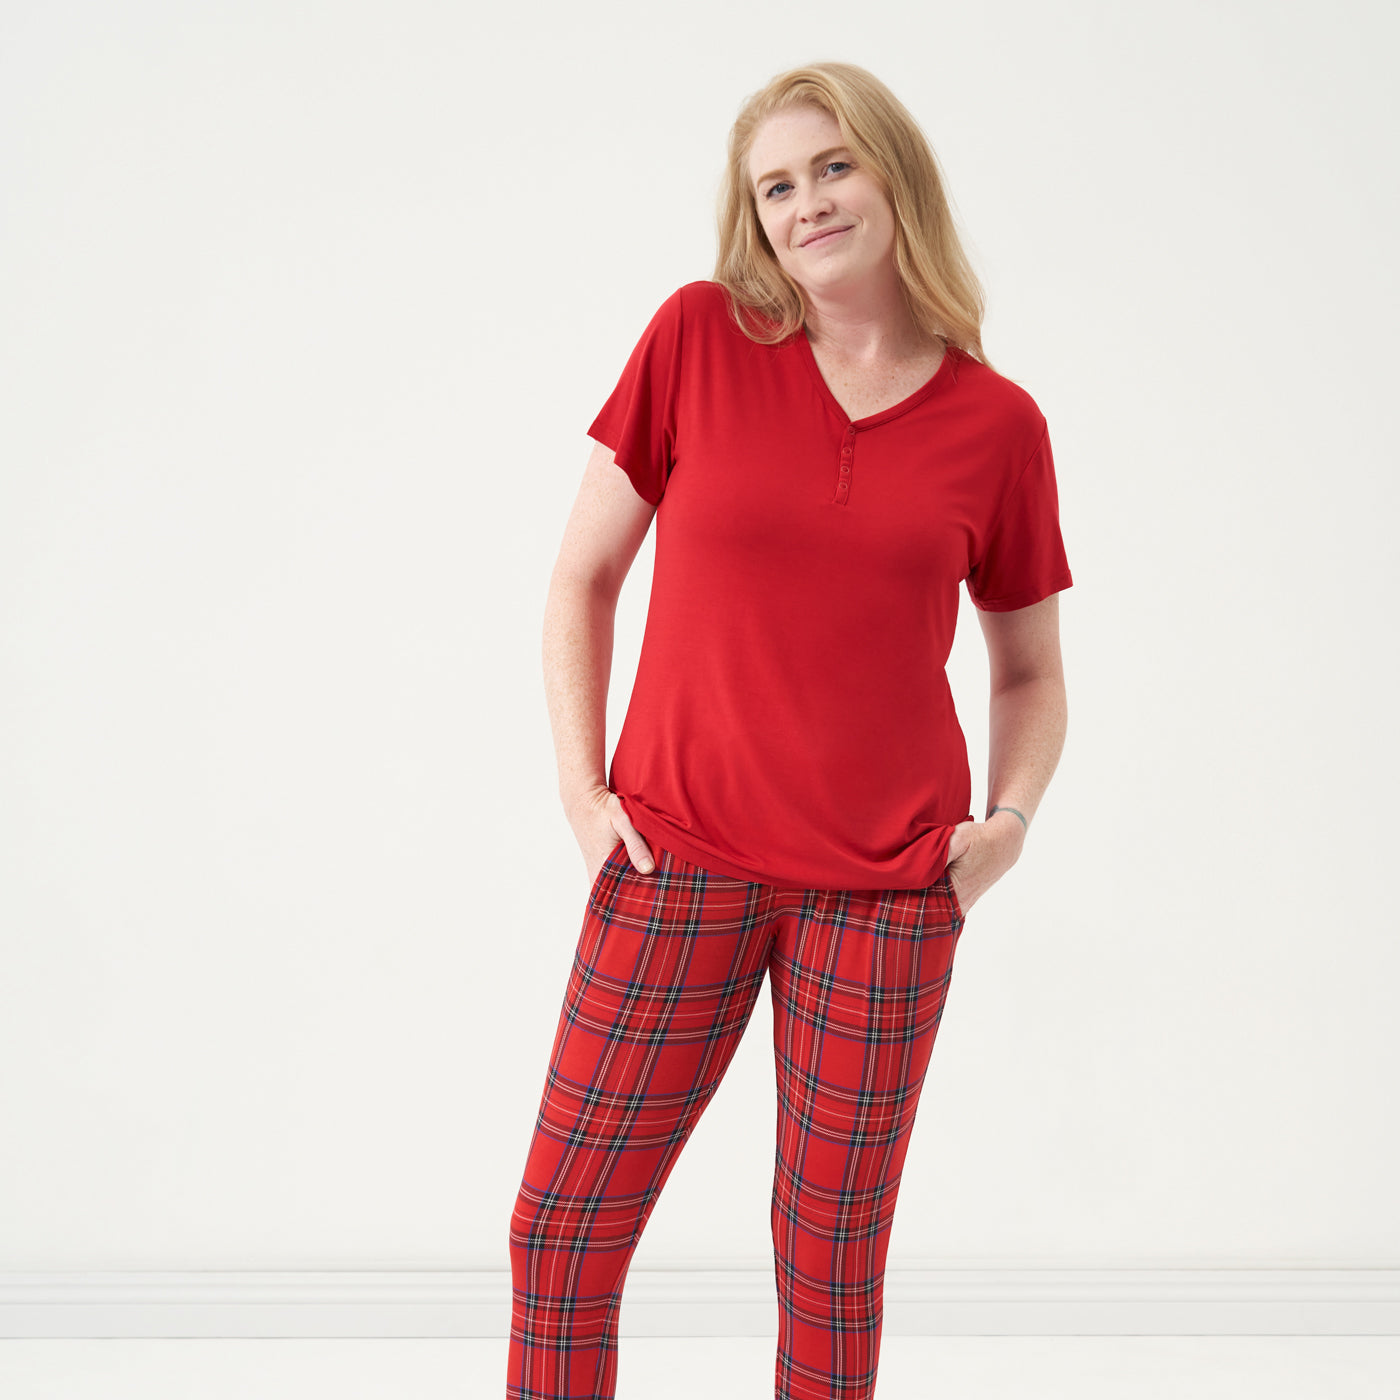 Alternate image of a woman wearing a Holiday Red women's short sleeve pajama top and coordinating pajama pants